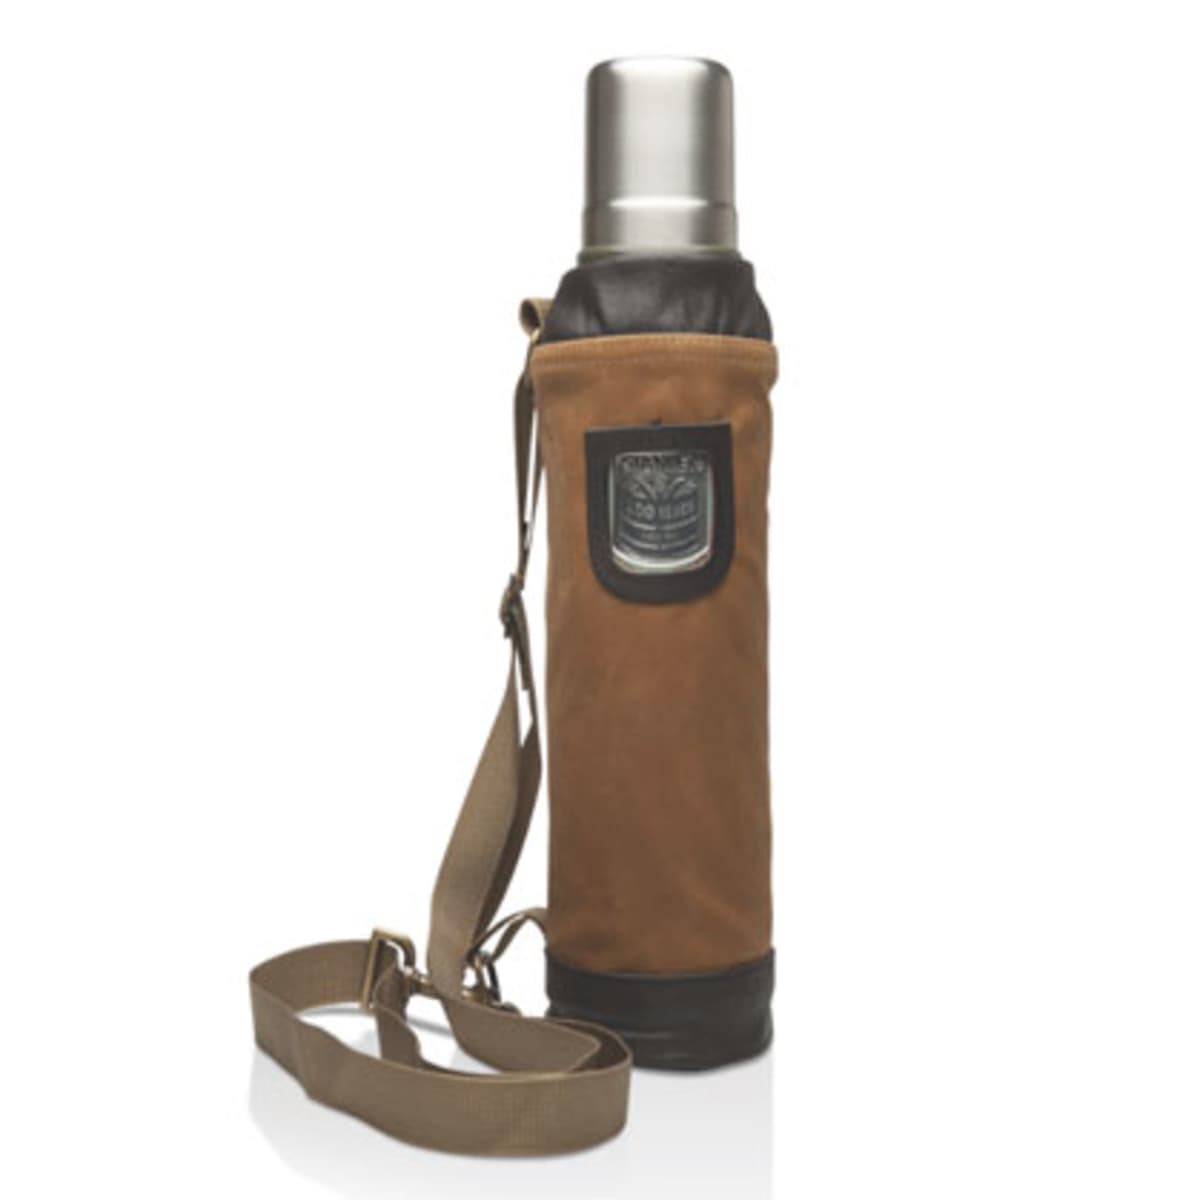 Stanley And Filson Release 100th Anniversary Edition Bottle and Shoulder  Sling - BikeMag